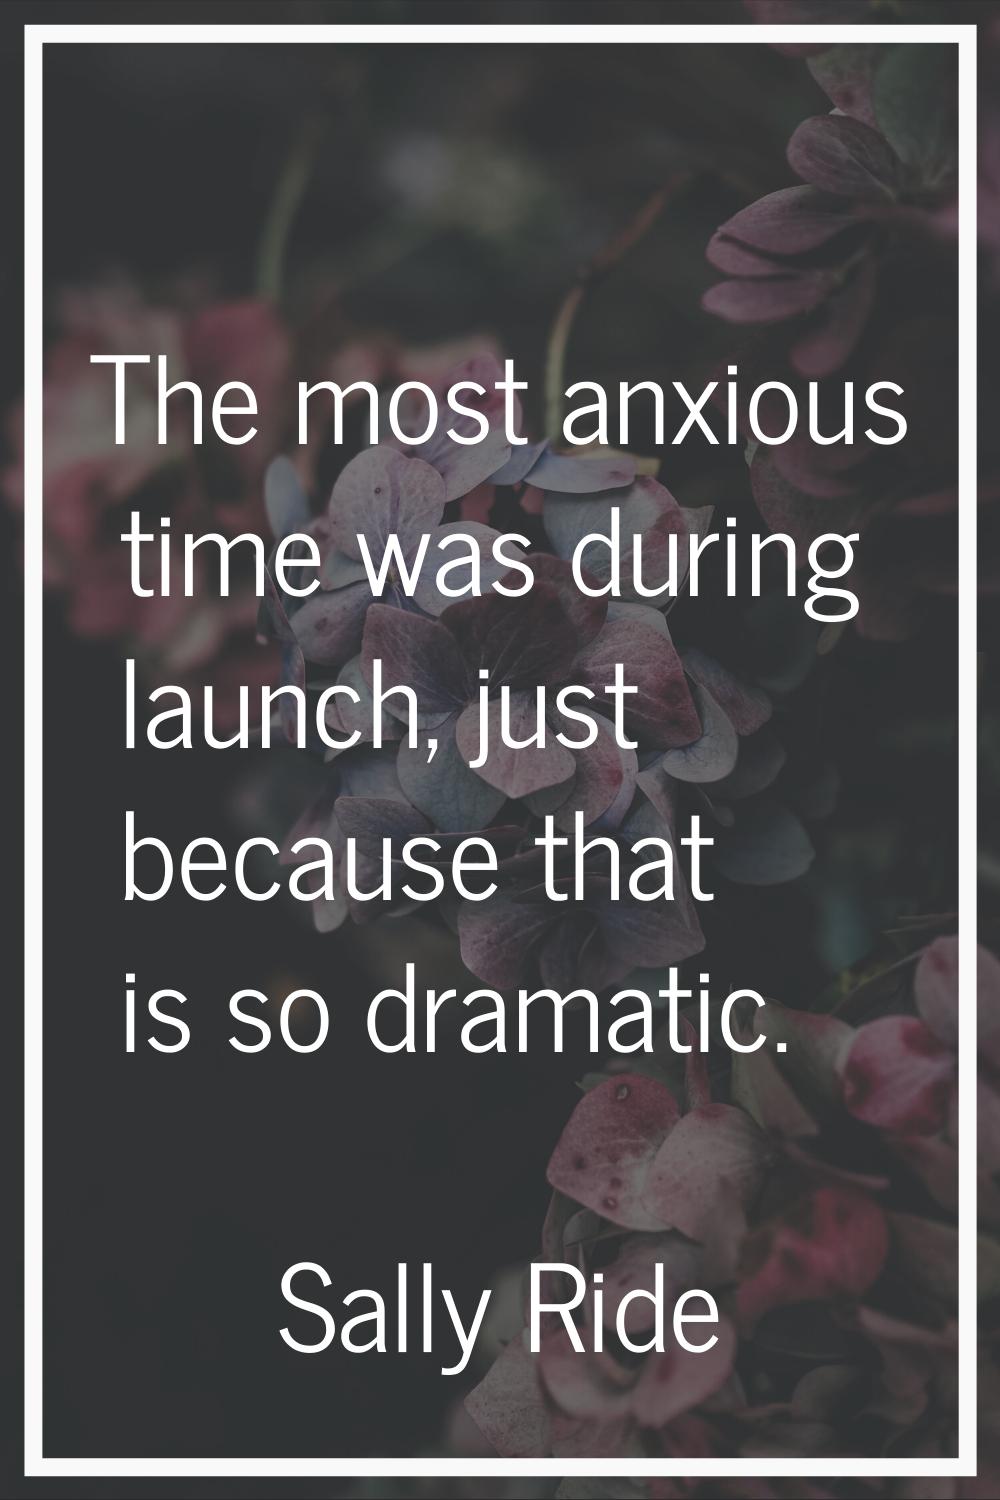 The most anxious time was during launch, just because that is so dramatic.